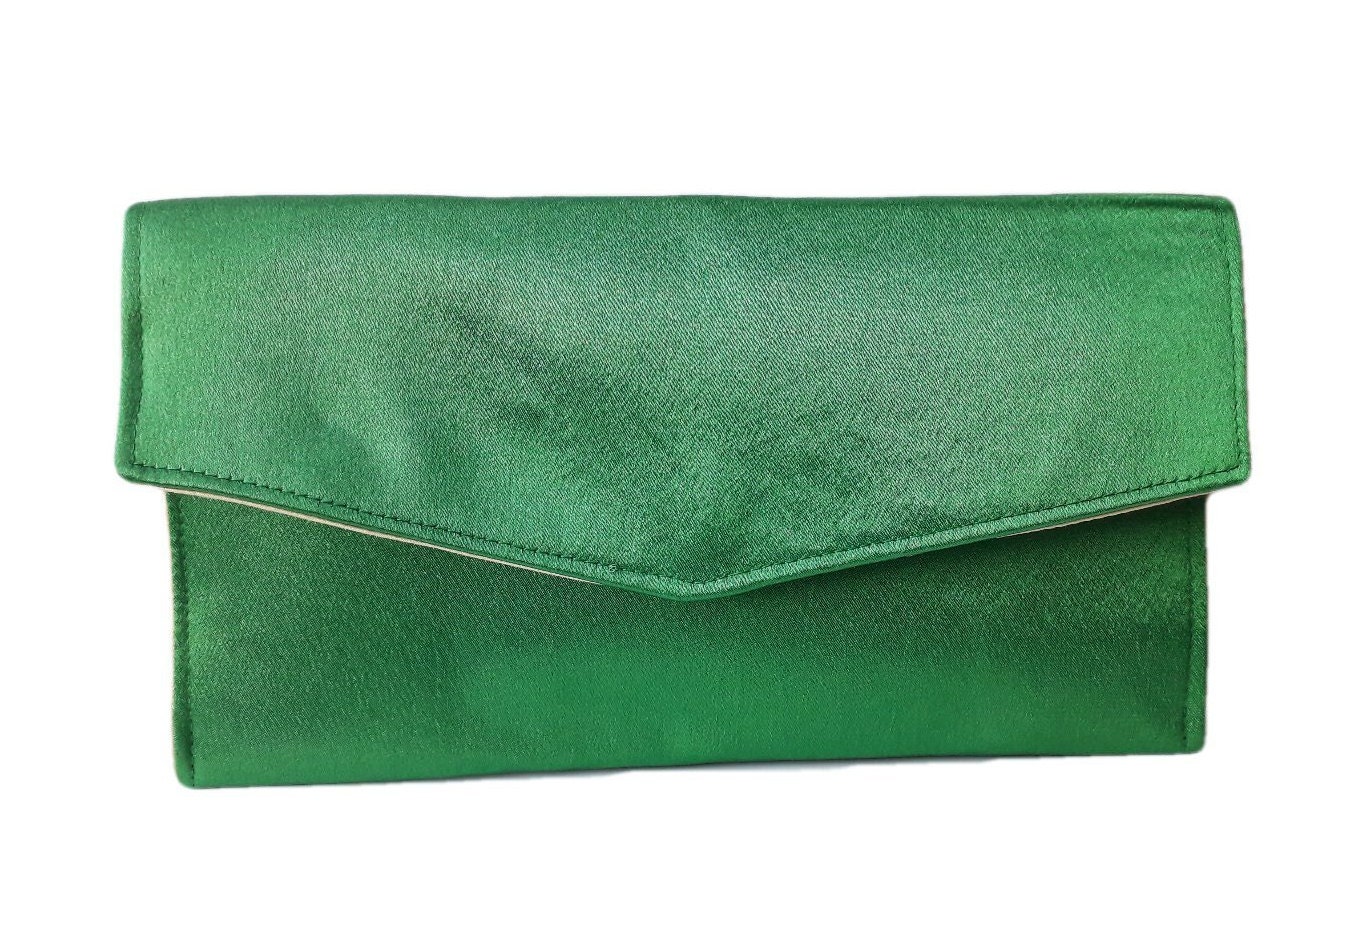 Handmade Emerald Green Clutch Bag Purse Gift for Her | Etsy